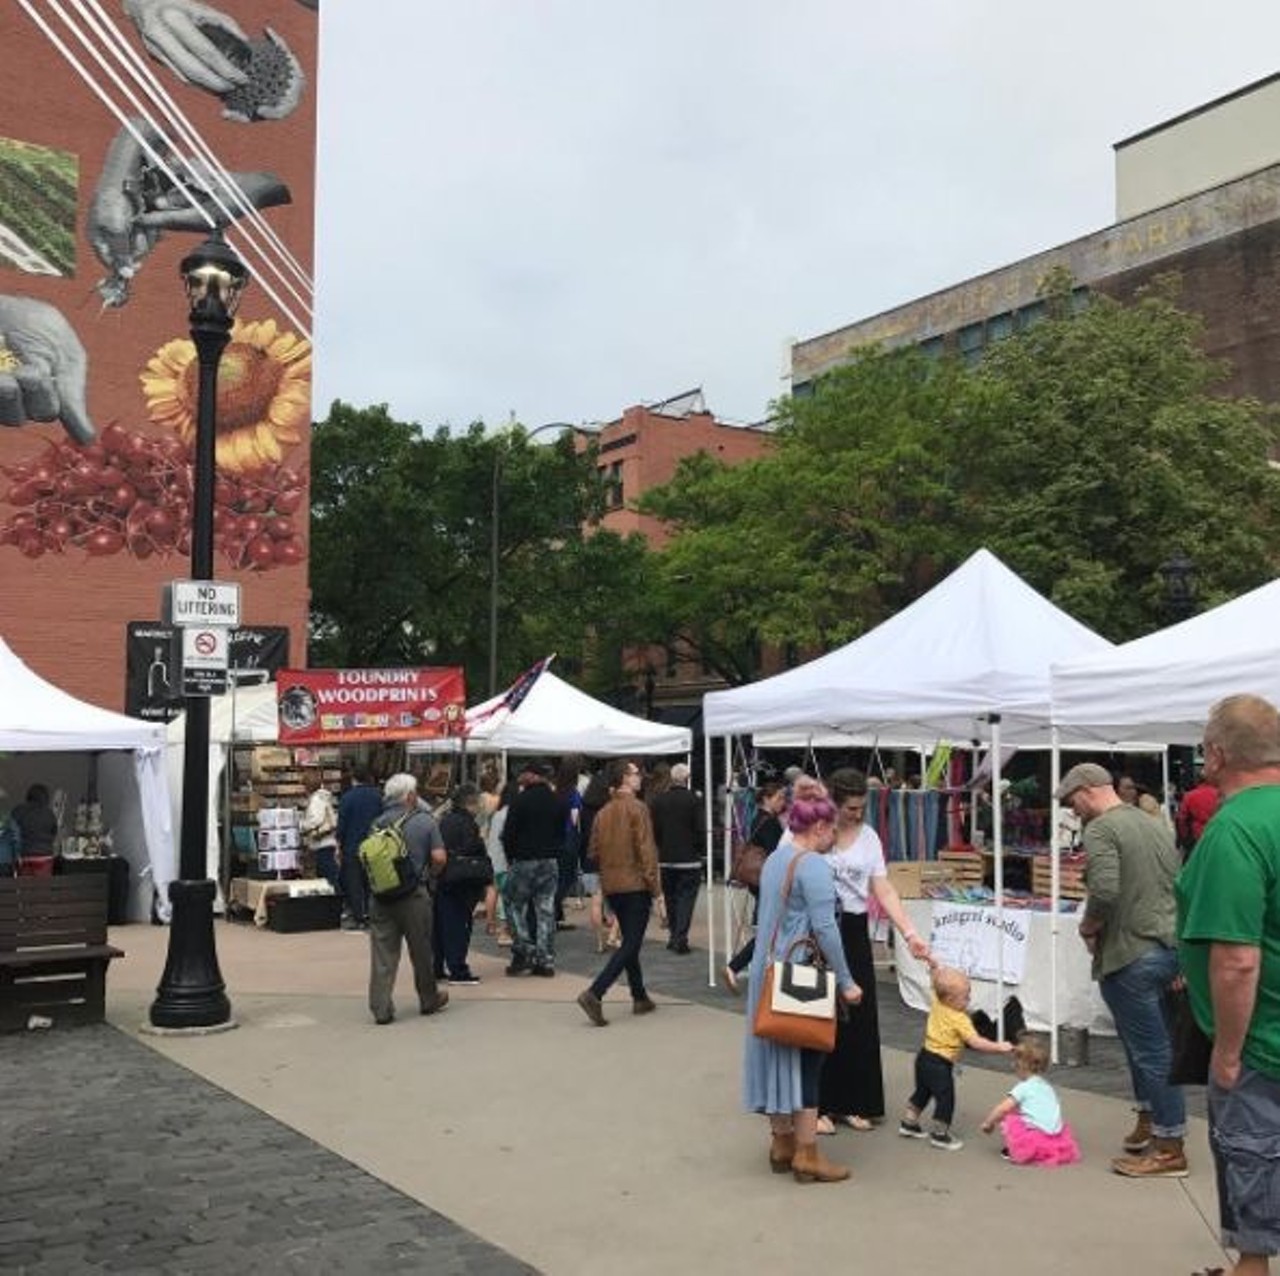  Cleveland Bazaar
Various locations
Support local art and check out Northeast Ohio&#146;s oldest handmade craft show. The Bazaar makes a final appearance Sept. 8, so don&#146;t miss it!
Photo via clebazaar/Instagram